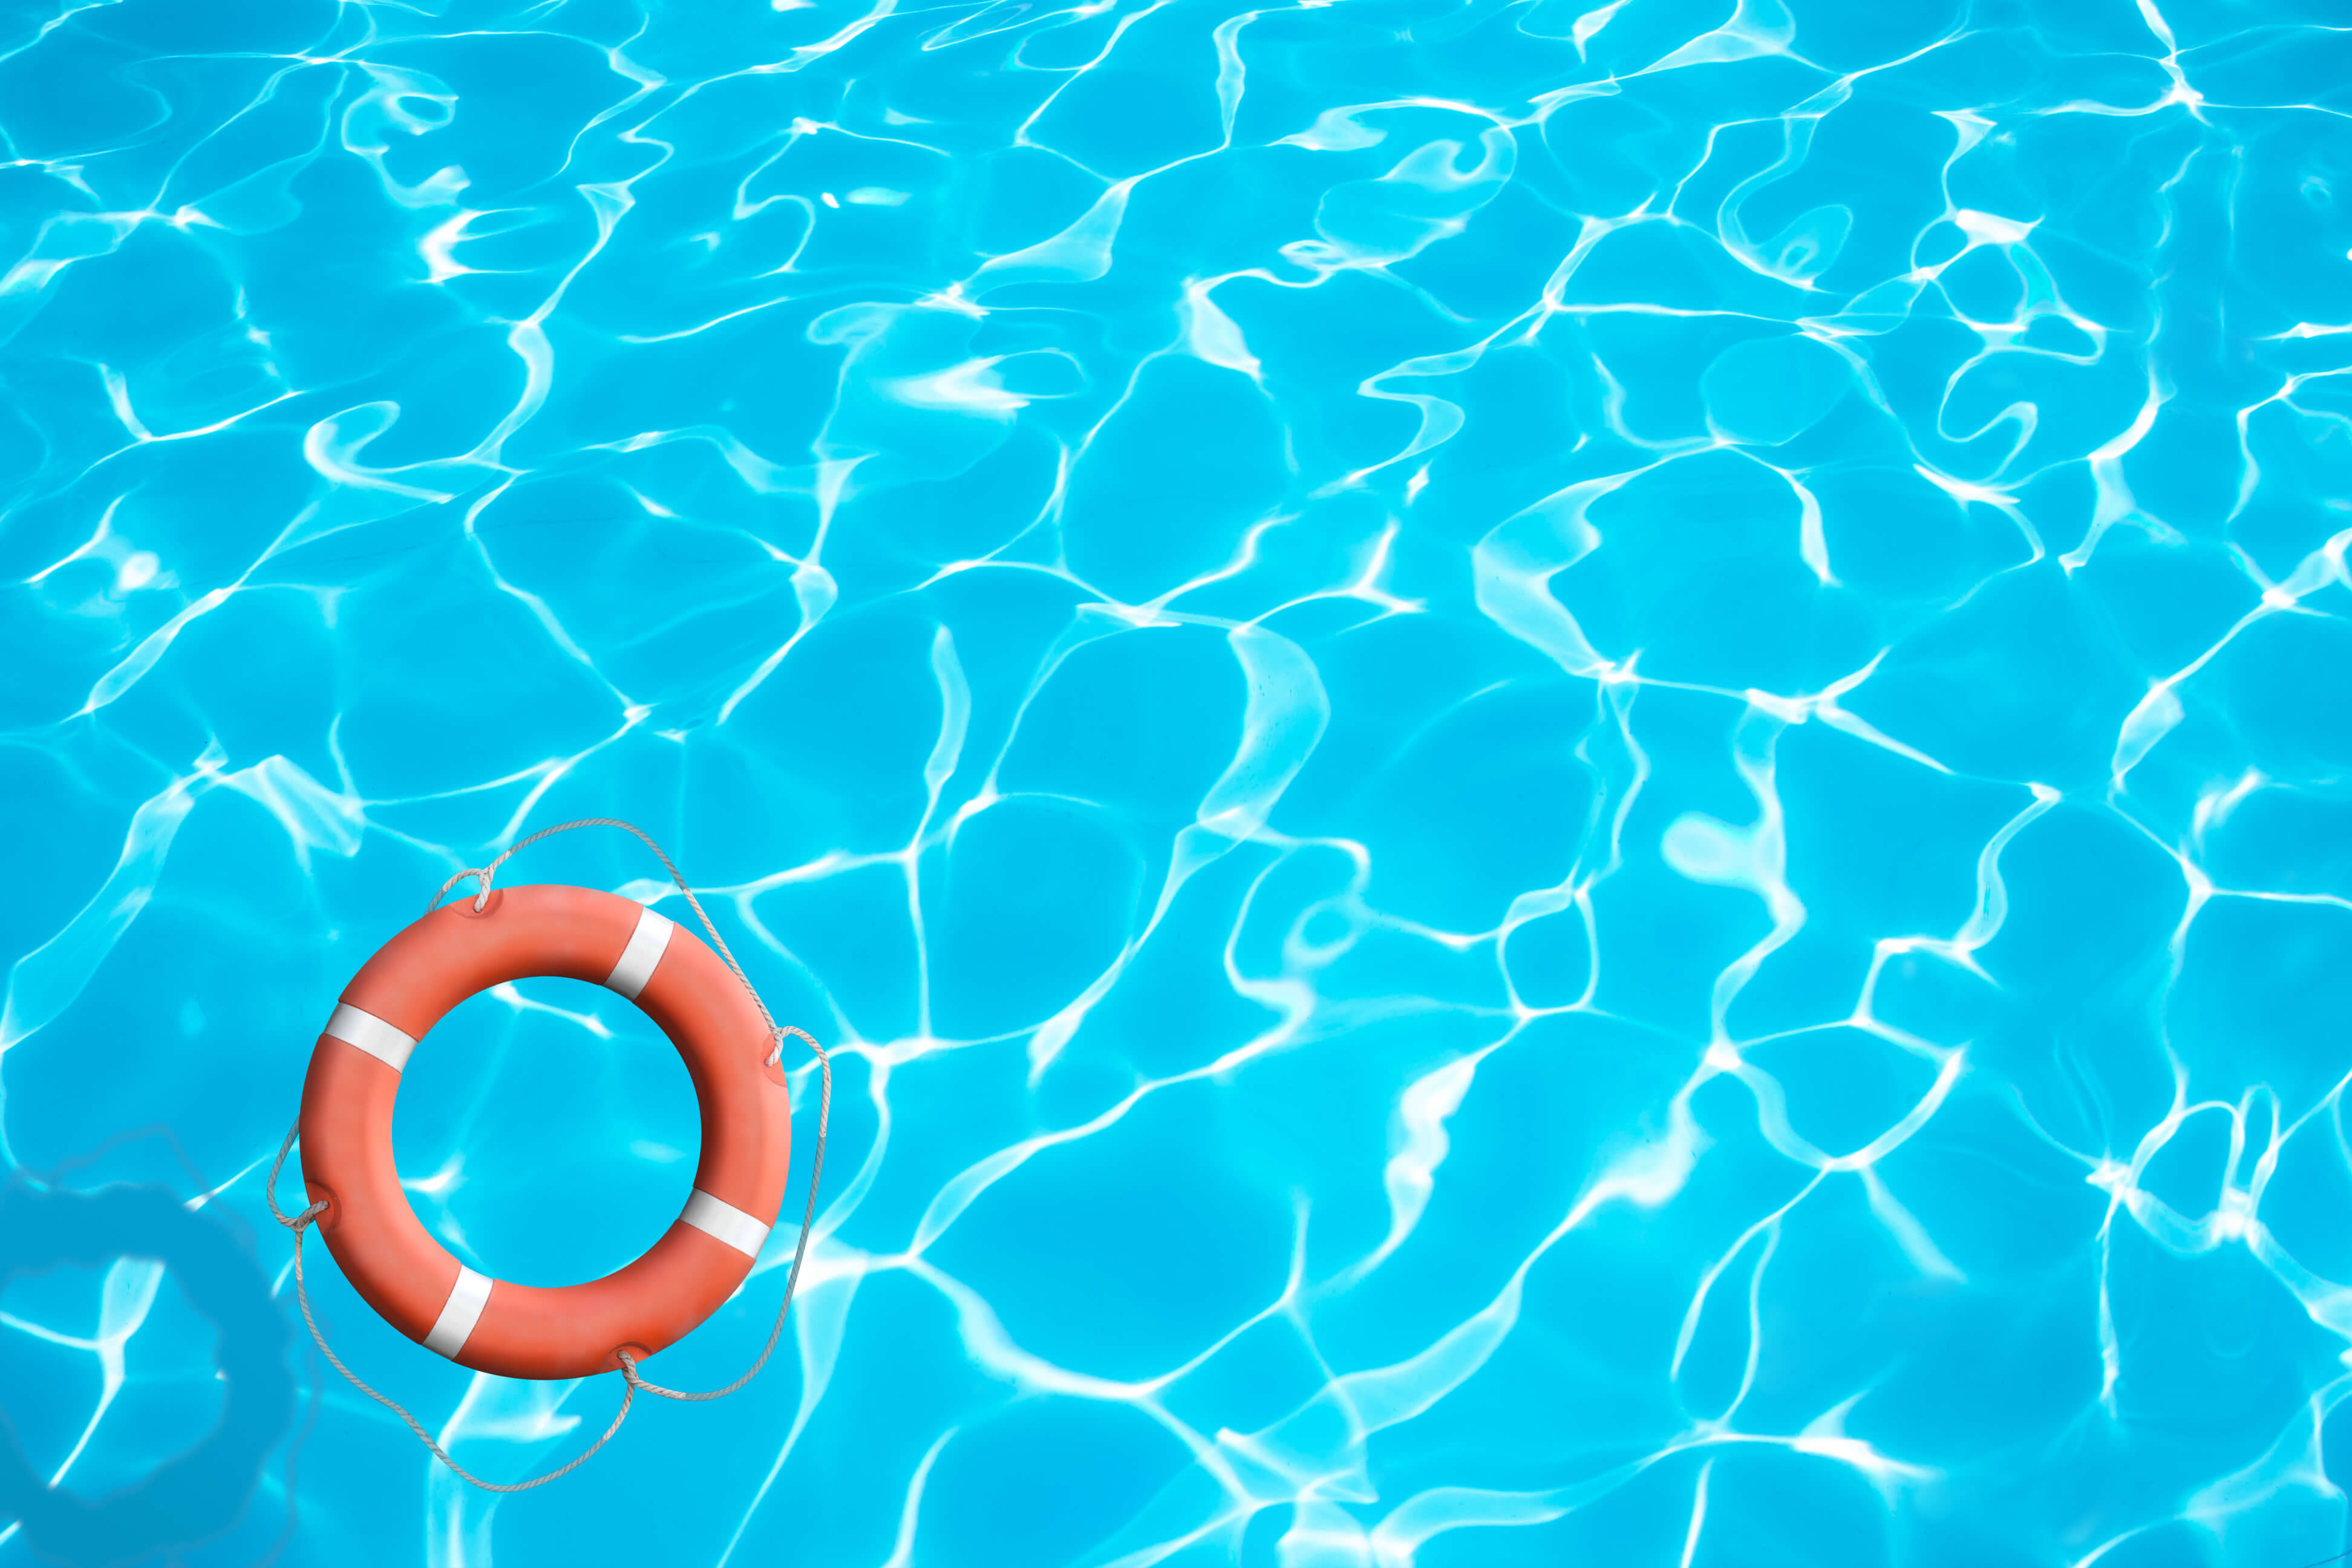 May is National Pool Safety Month